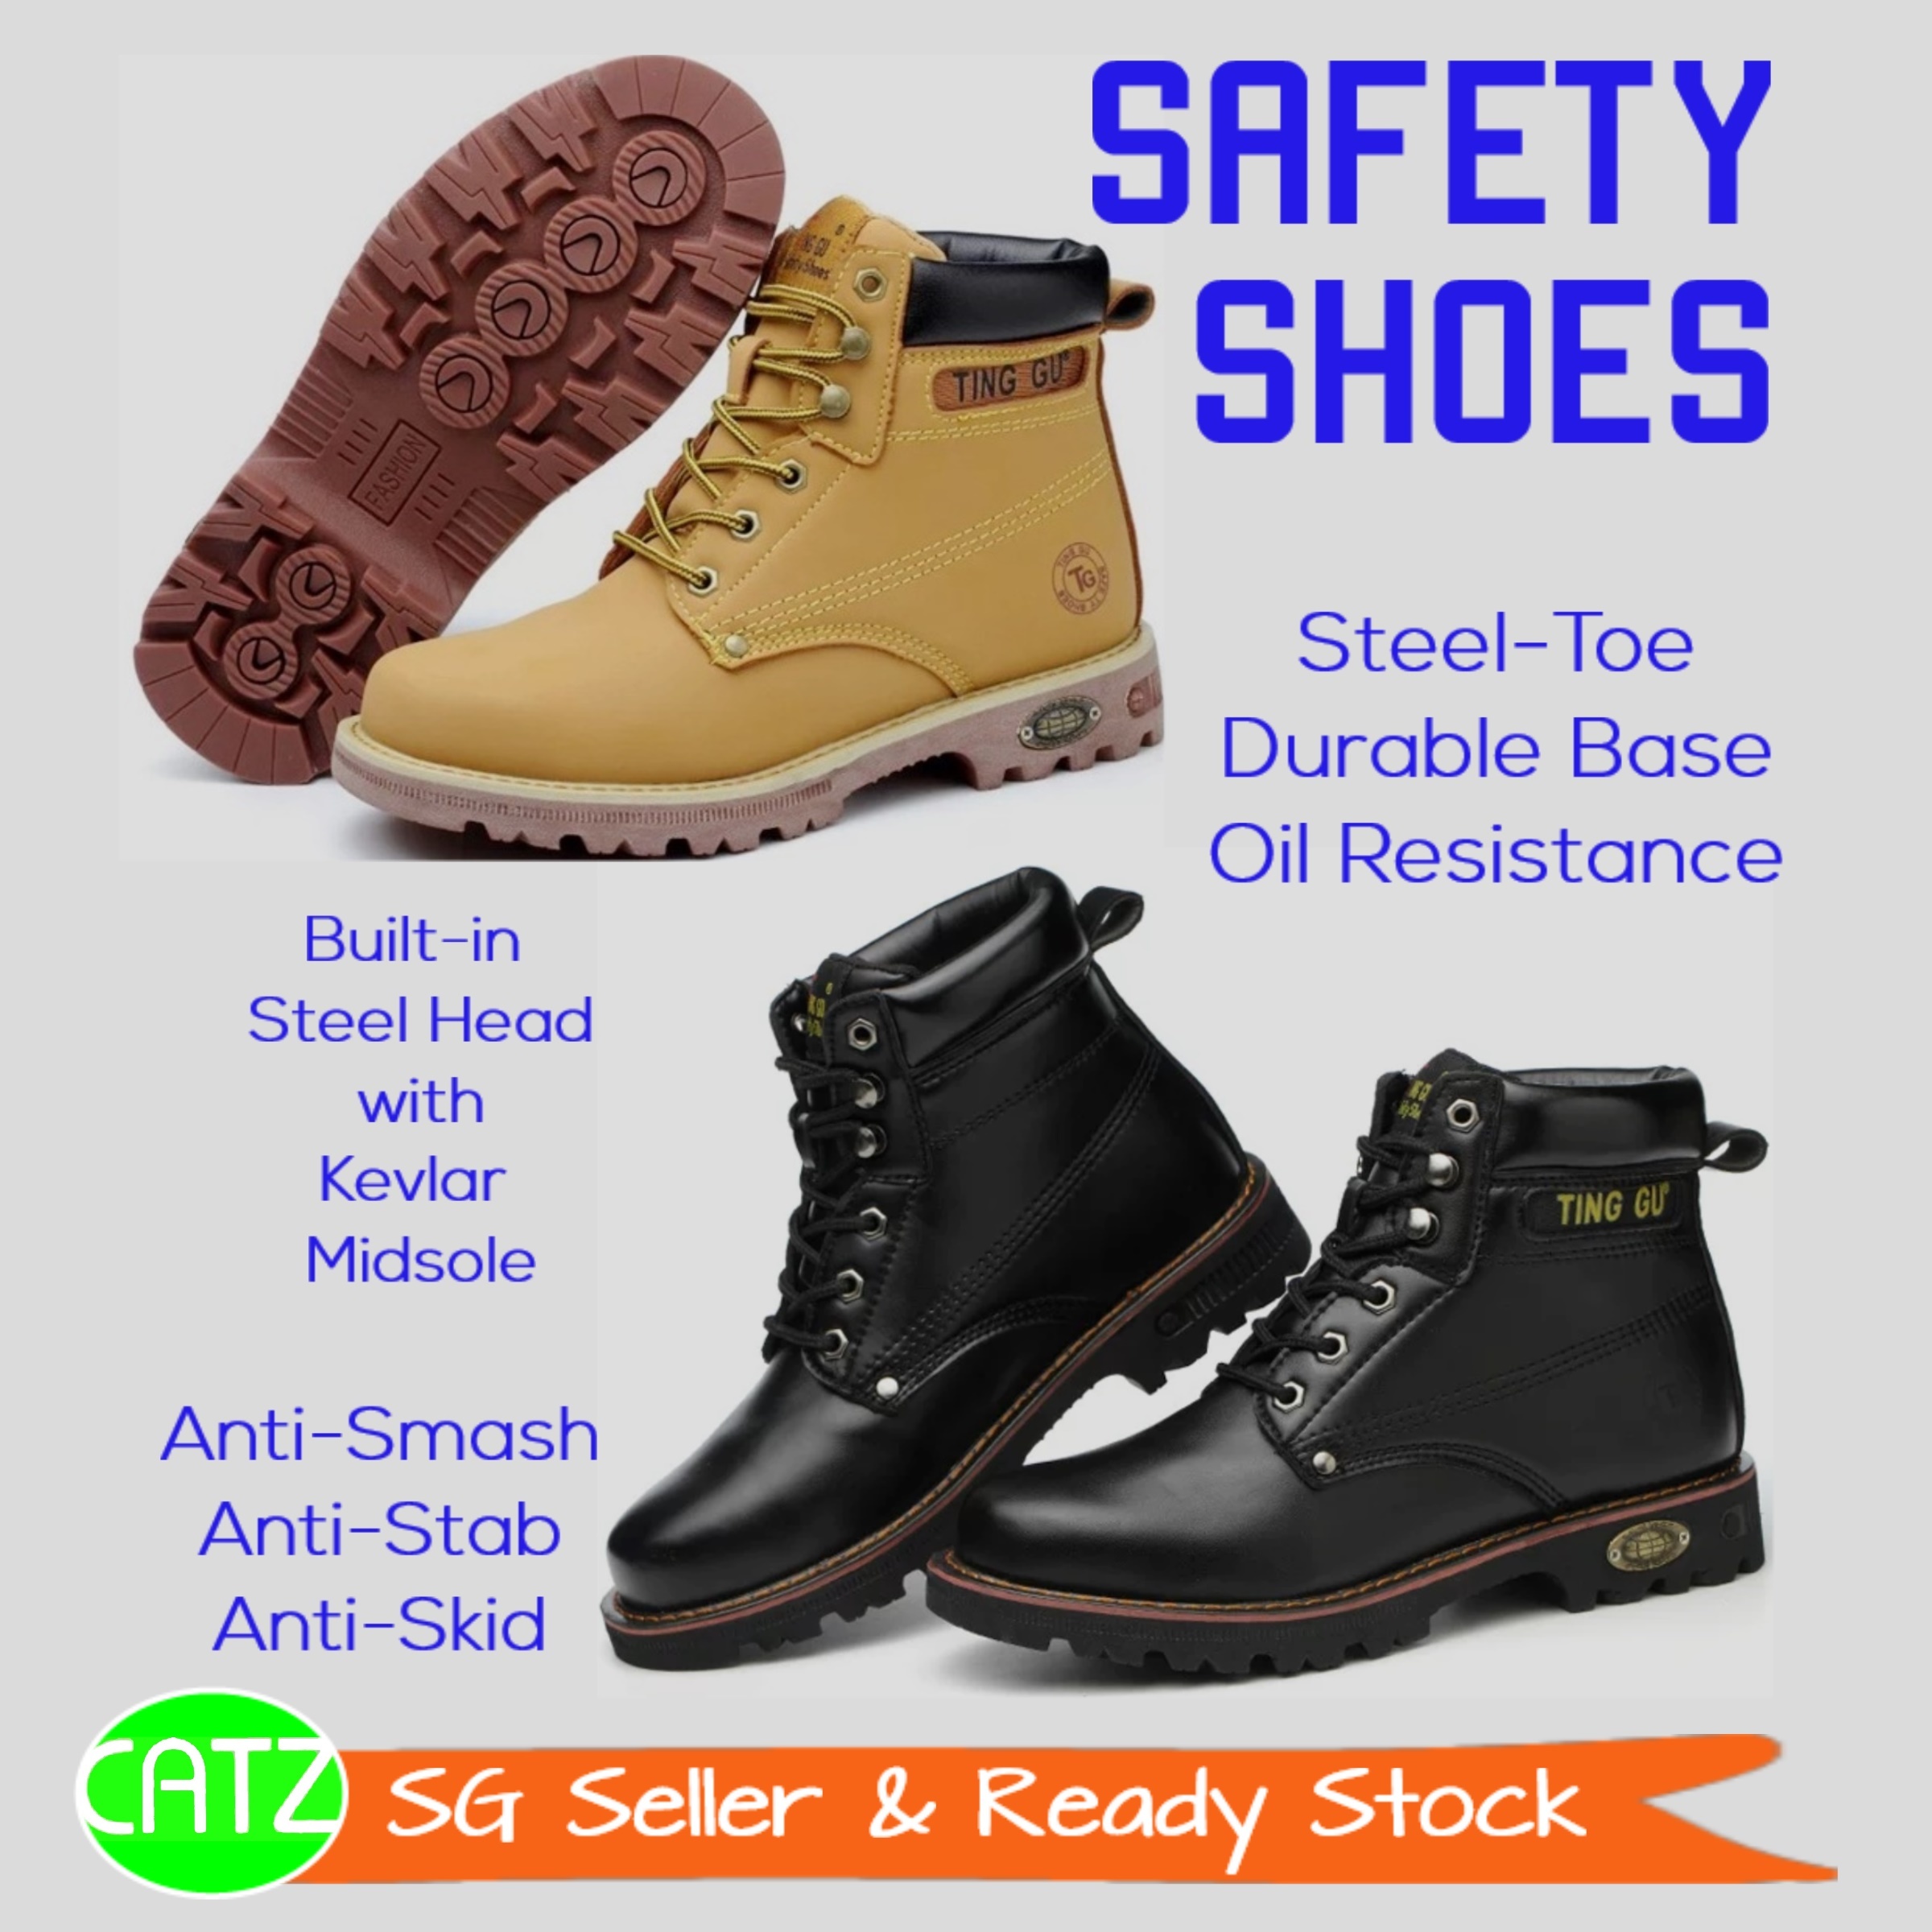 mens work safety trainers